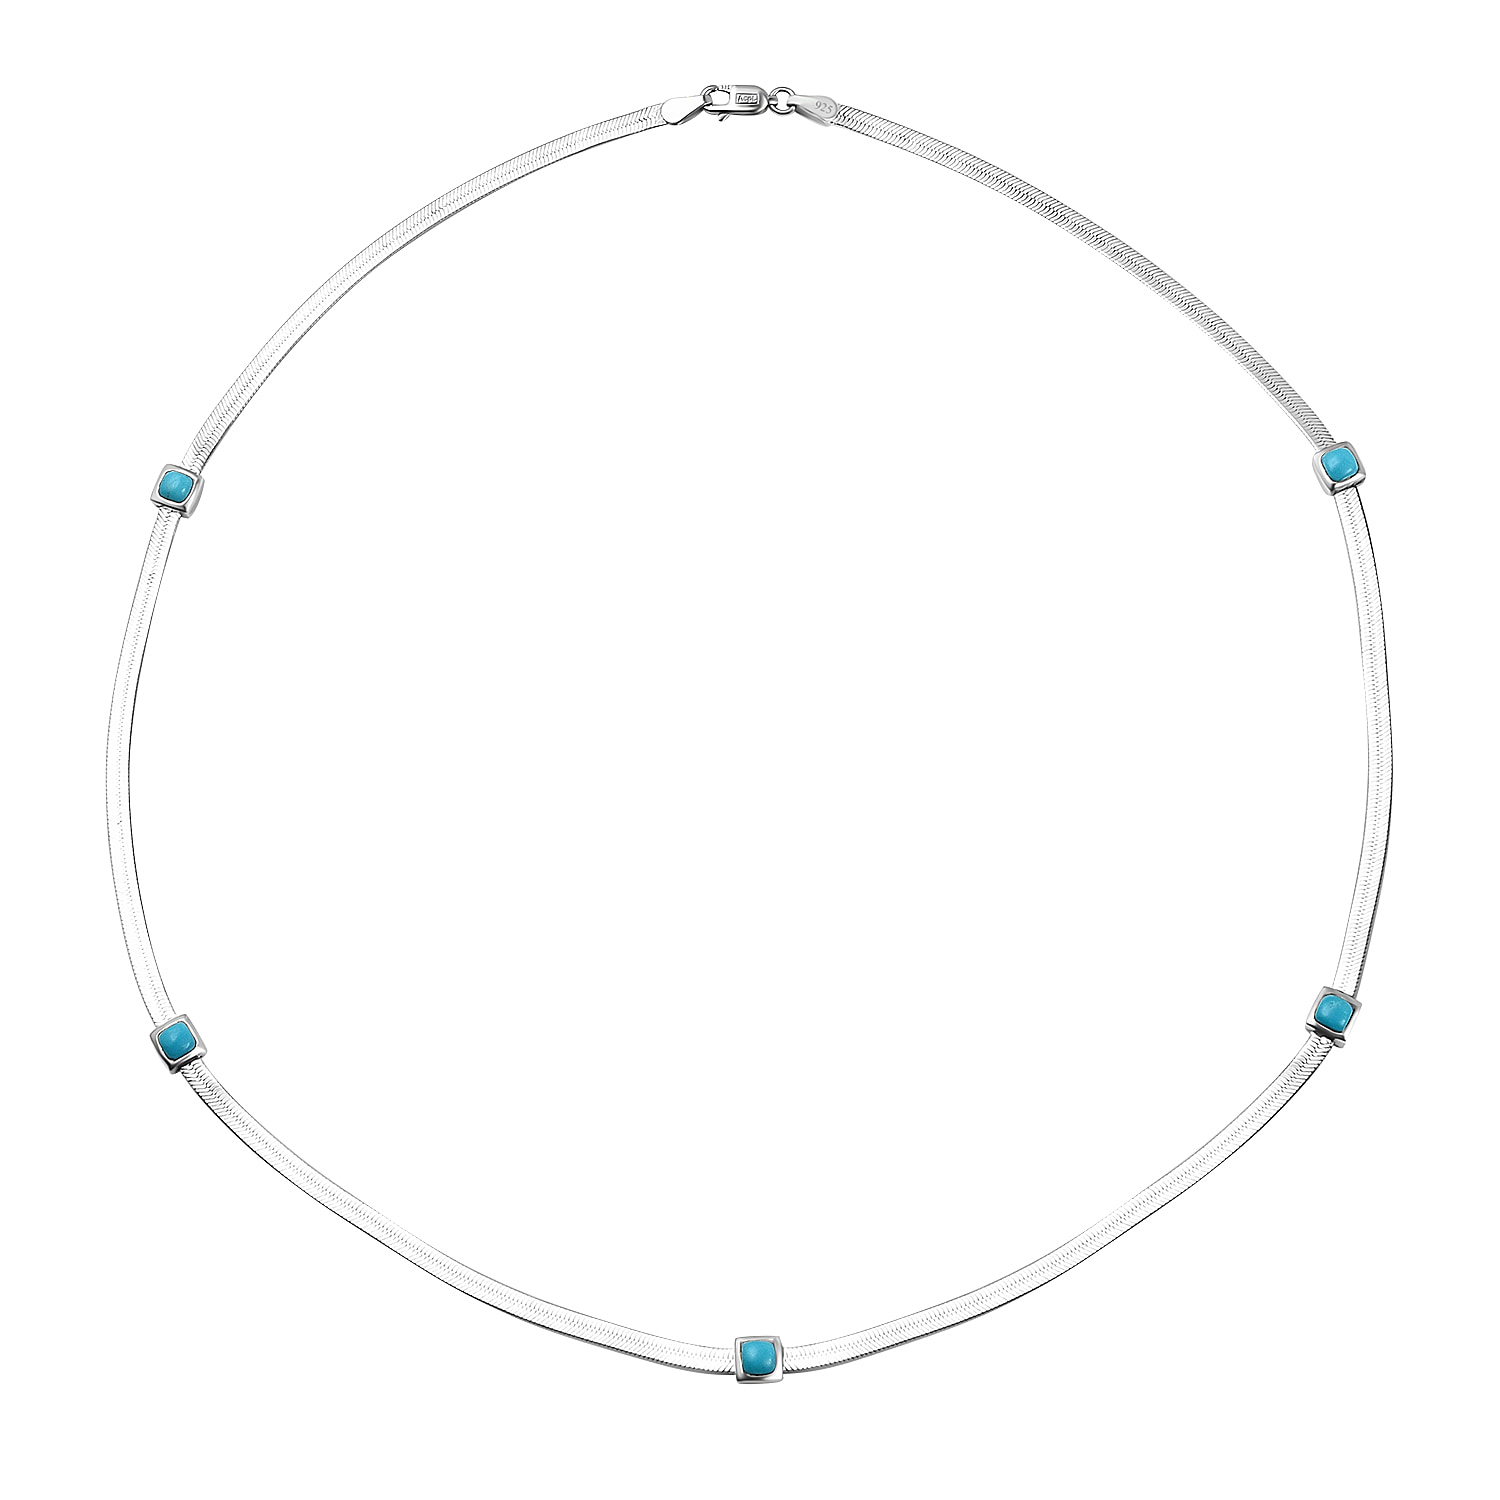 Designer Inspired - Sleeping Beauty Turquoise Herringbone Necklace (Size - 20) in Platinum Overlay Sterling Silver